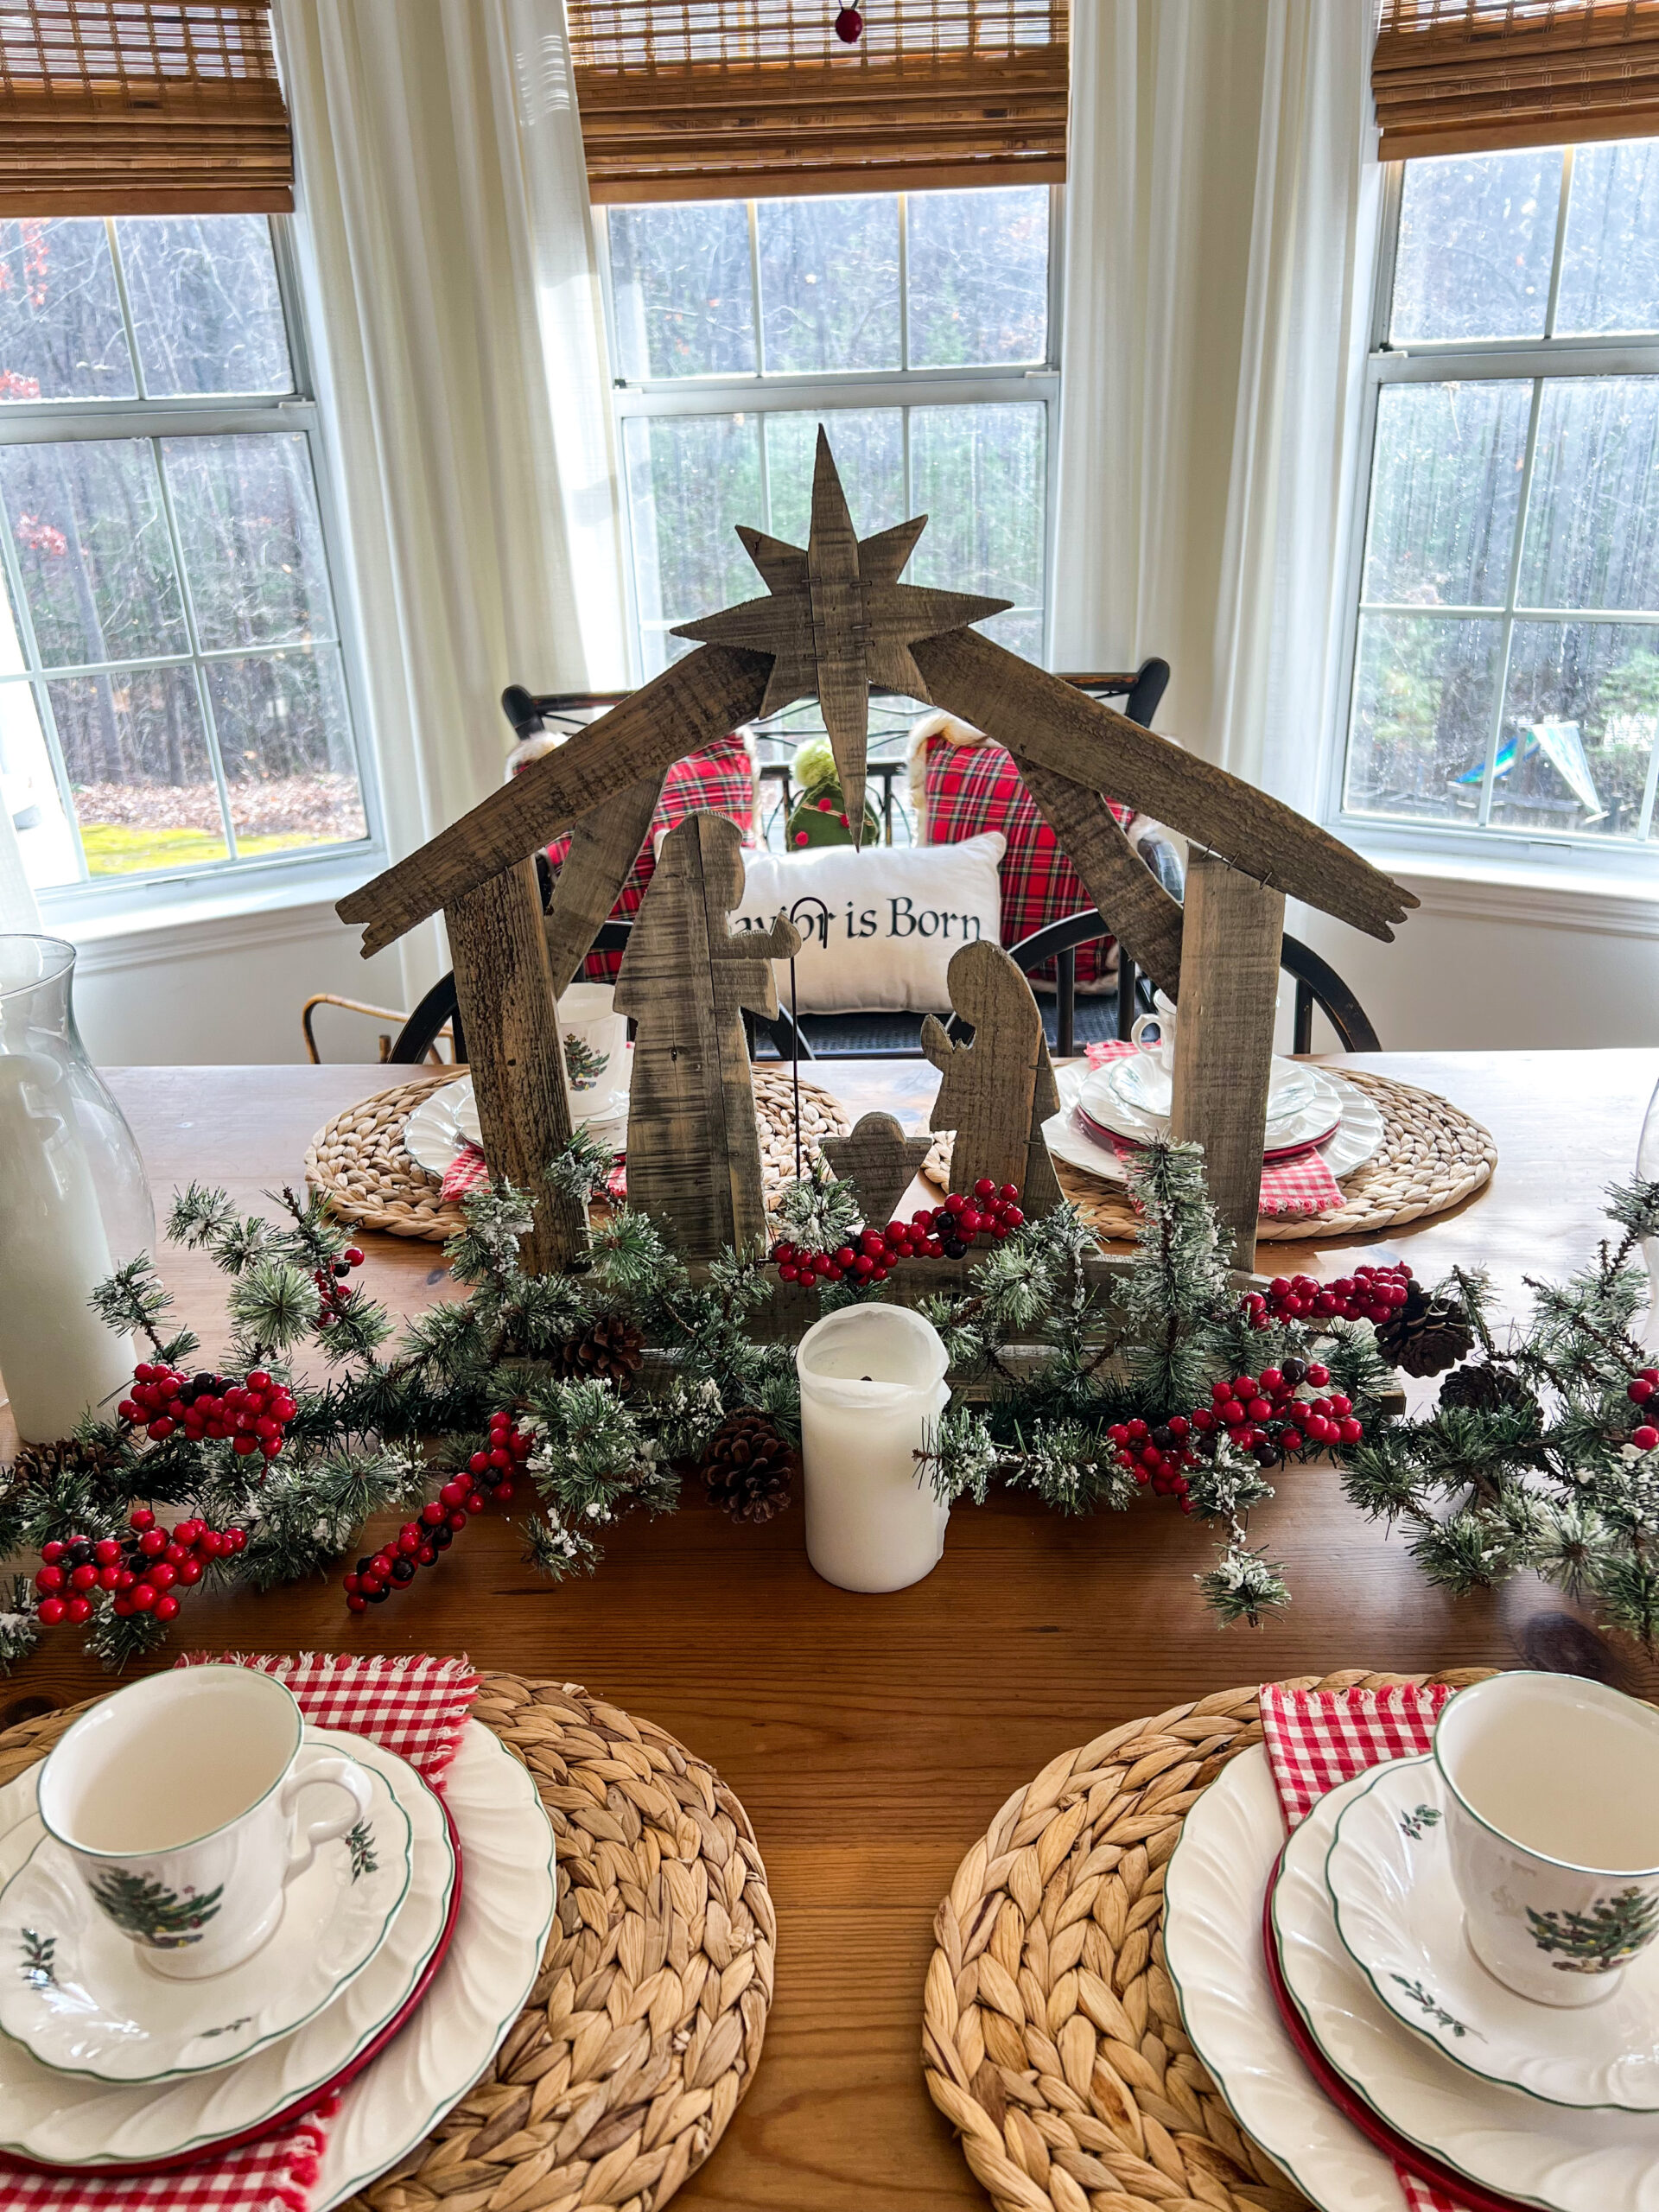 Step By Step Guide To Styling The Perfect Christmas Dining Table - That ...